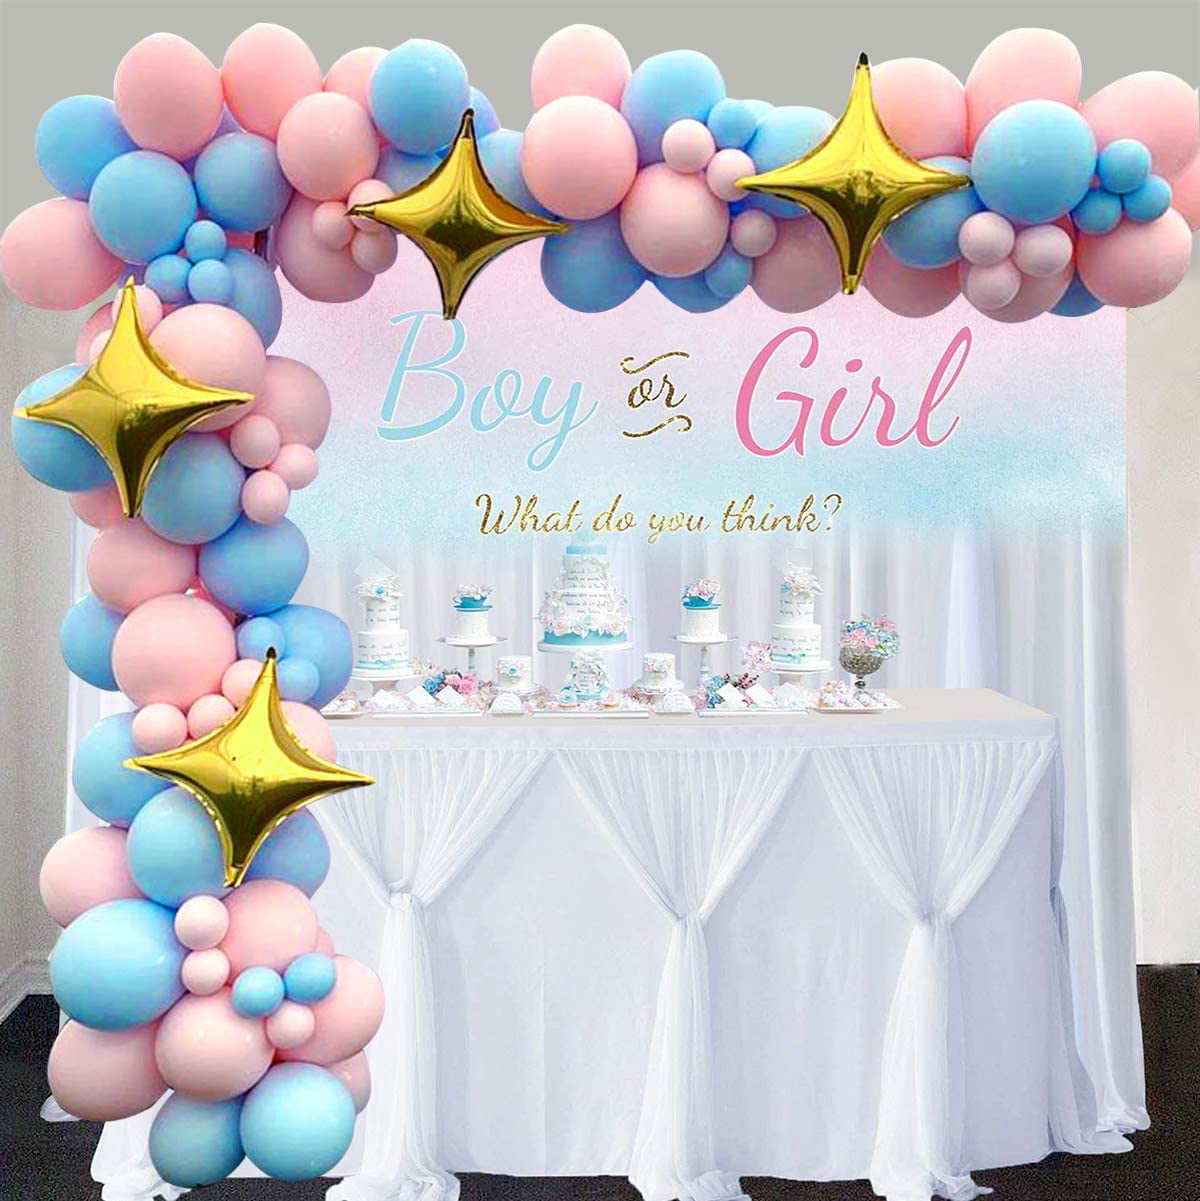 Details about   Large Baby Shower Balloons Boy or Girl Foil Gender reveal Birthday Party Decor 